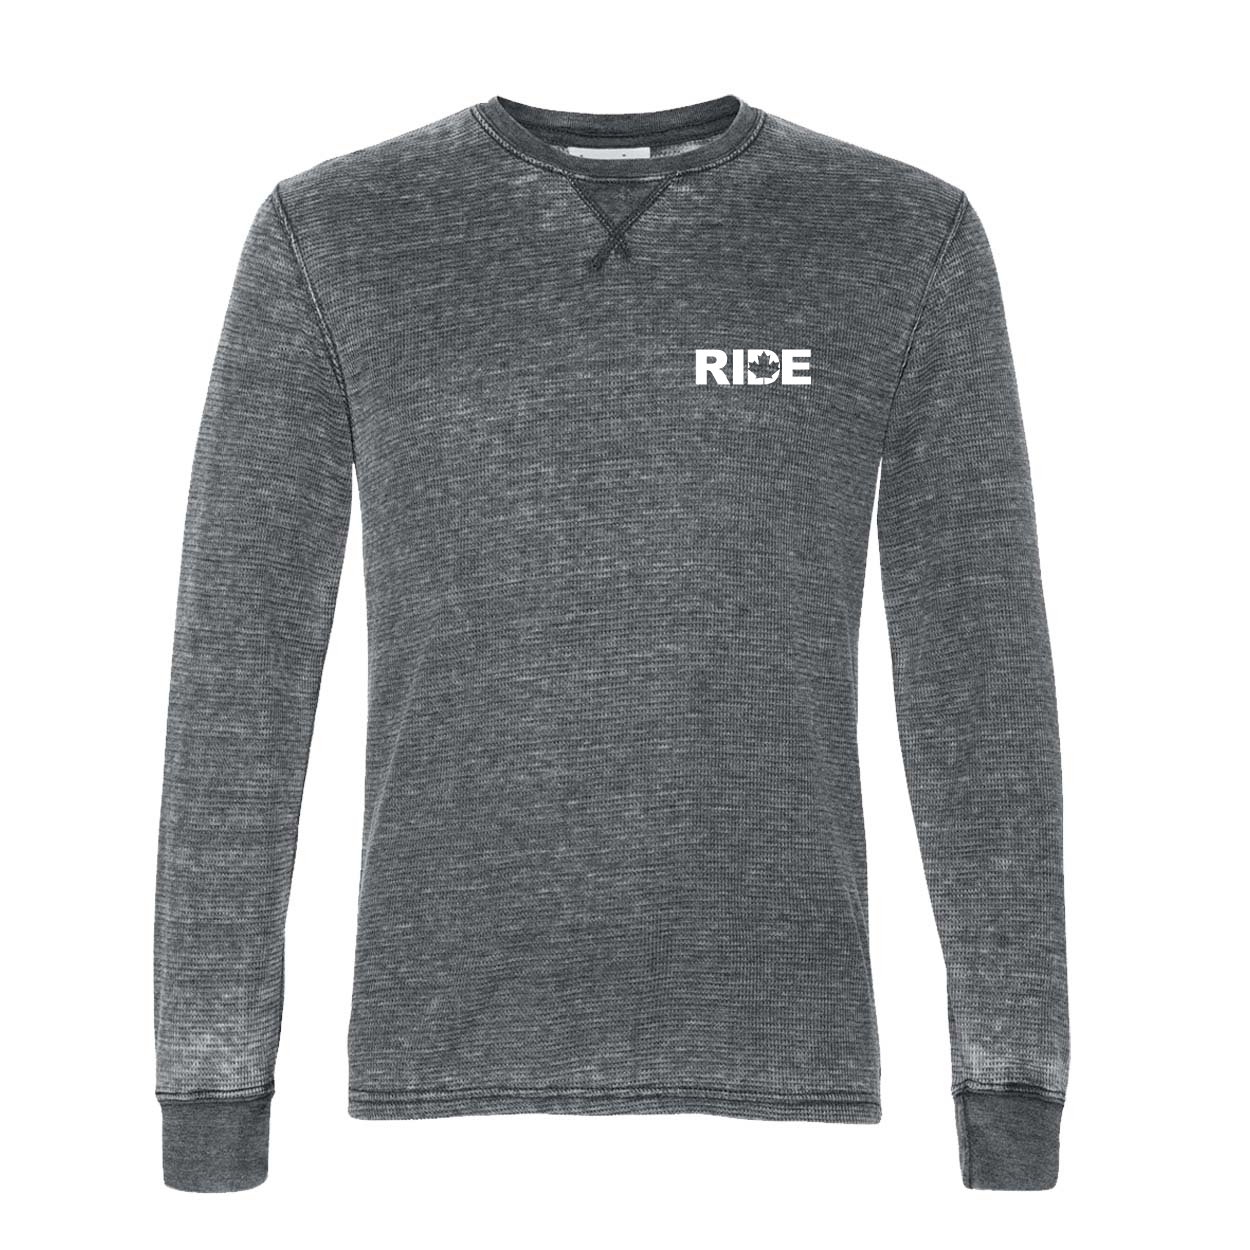 Ride Canada Long Sleeve Thermal Shirt Heather Charcoal (White Logo)